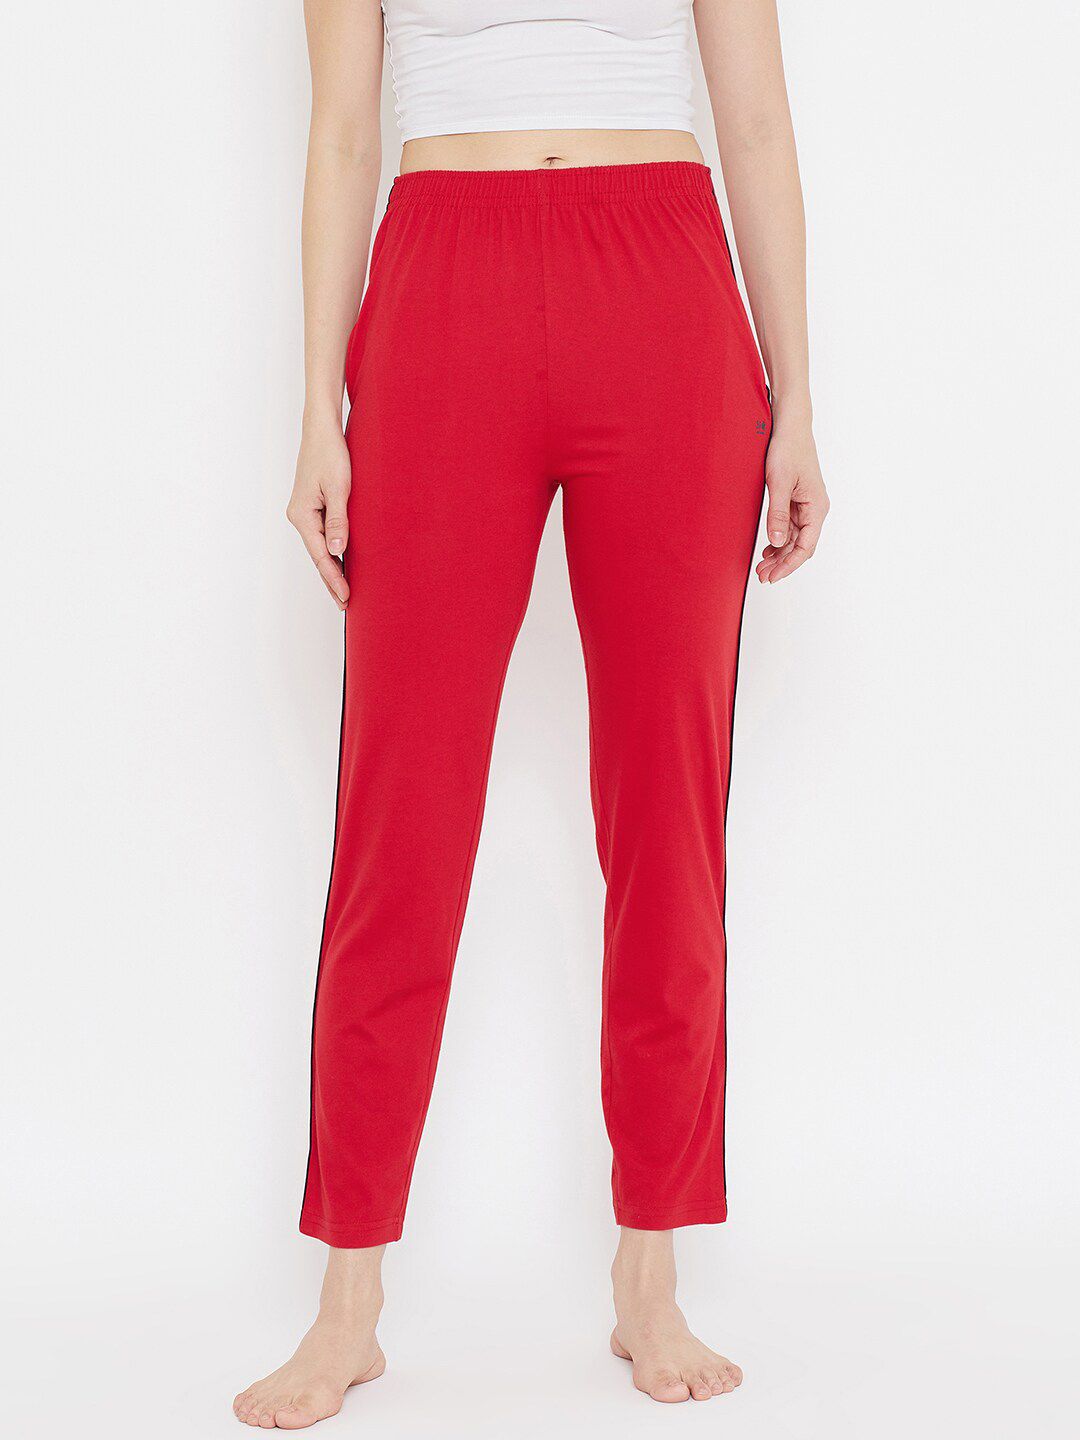 Okane Women Red Solid Lounge Pants Price in India